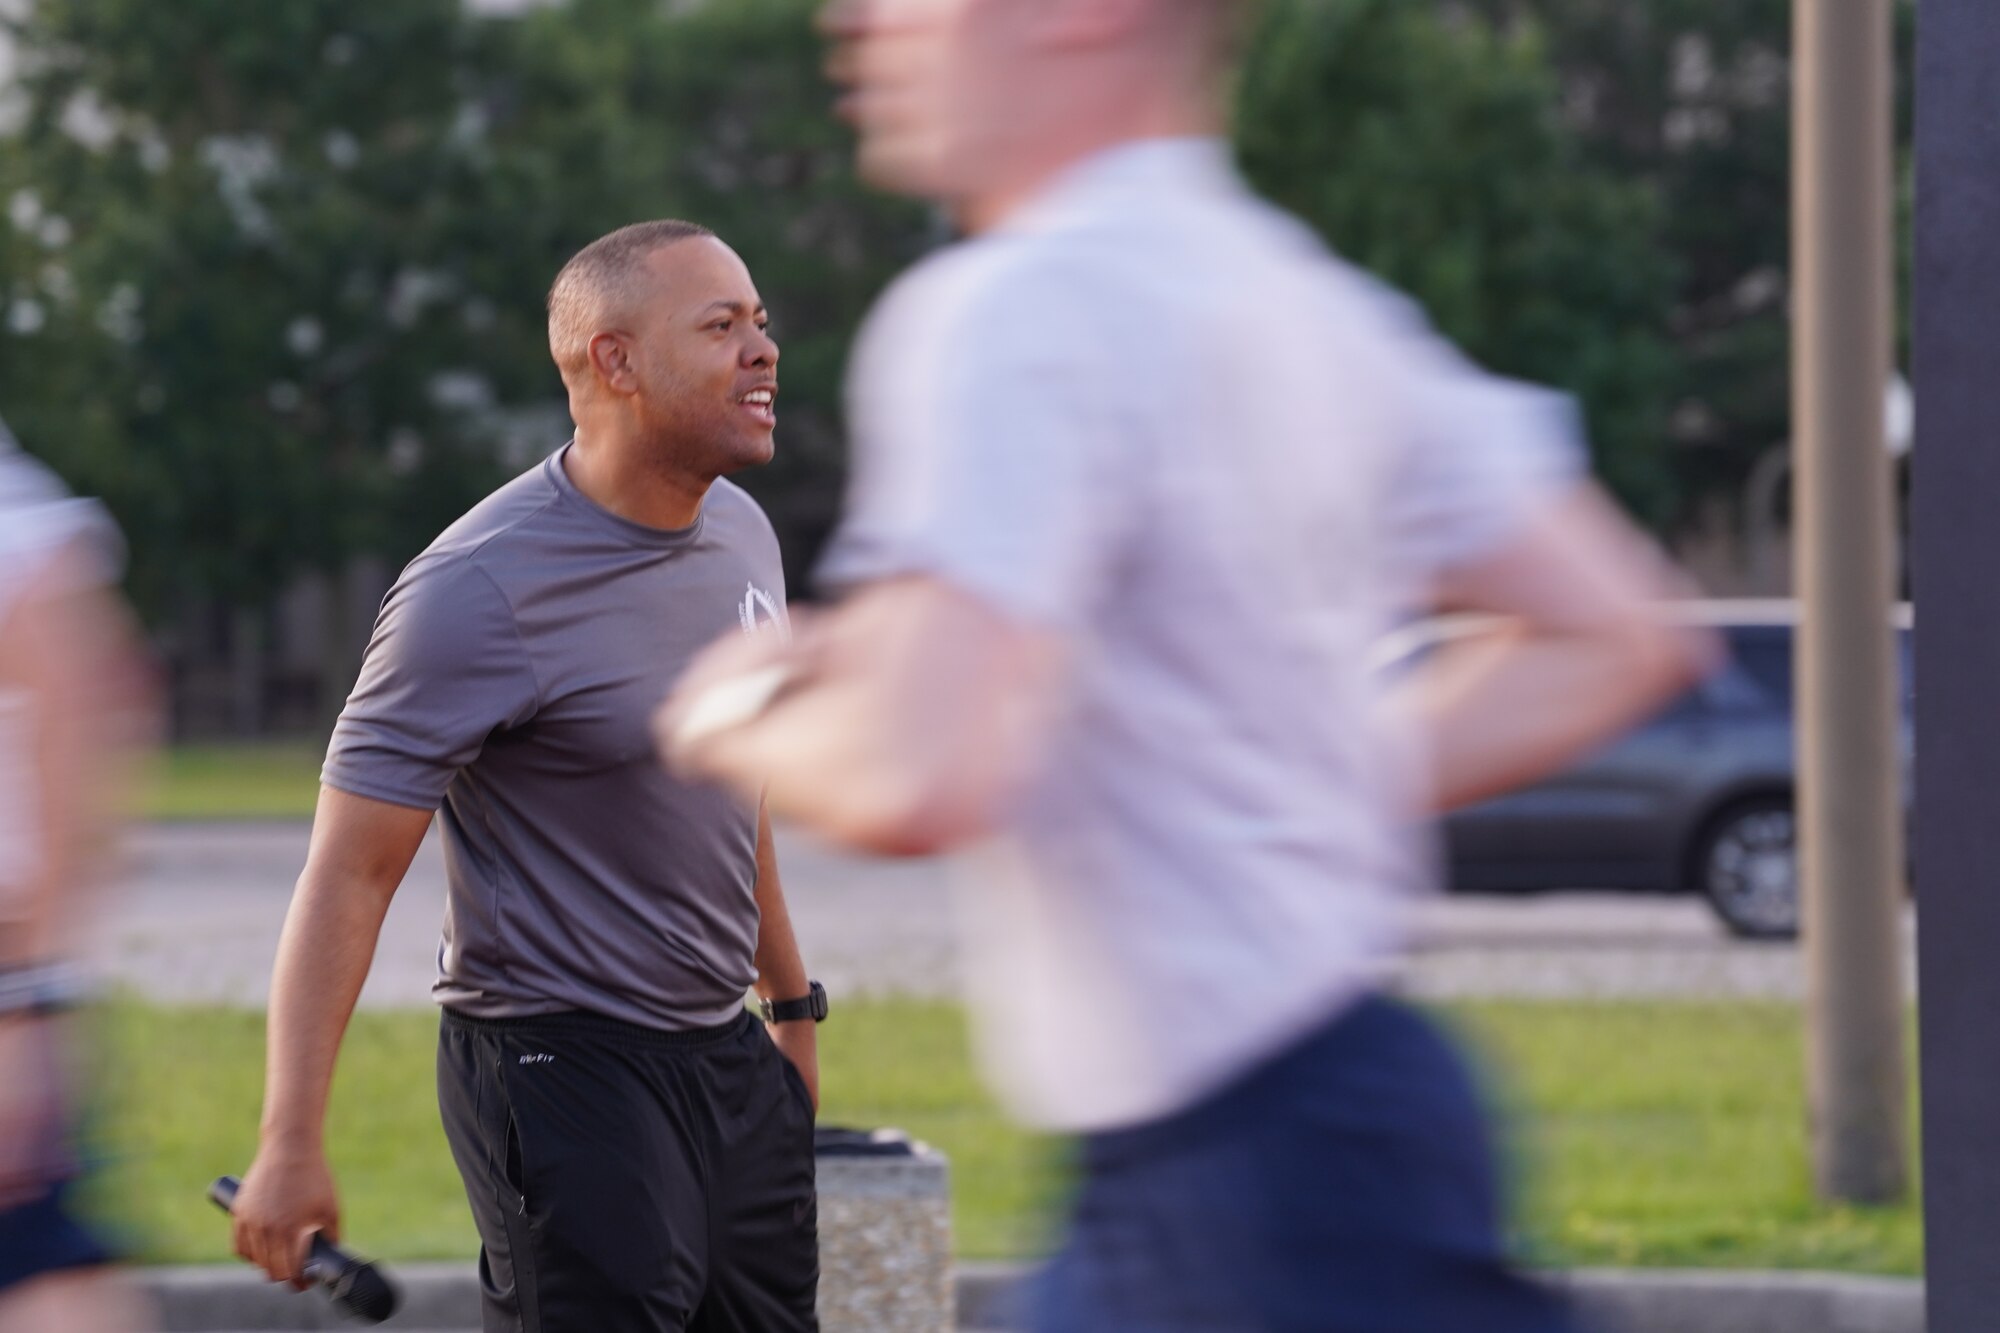 U.S. Air Force Tech. Sgt. Alvin Morris, 336th Training Squadron master military training leader, motivates Airmen in training during physical training at the Triangle track on Keesler Air Force Base, Mississippi, June 29, 2021. “An MTL consistently enforces standards of conduct and expectations to develop Airmen to be prepared to enter the operational Air Force,” said Morris. “We are the professional example for Airmen to emulate and first look at what a healthy leadership team looks like. It is our responsibility to inspire Airmen to take pride in serving and exhibit excellence in all we do.” (U.S. Air Force photo by Senior Airman Spencer Tobler)